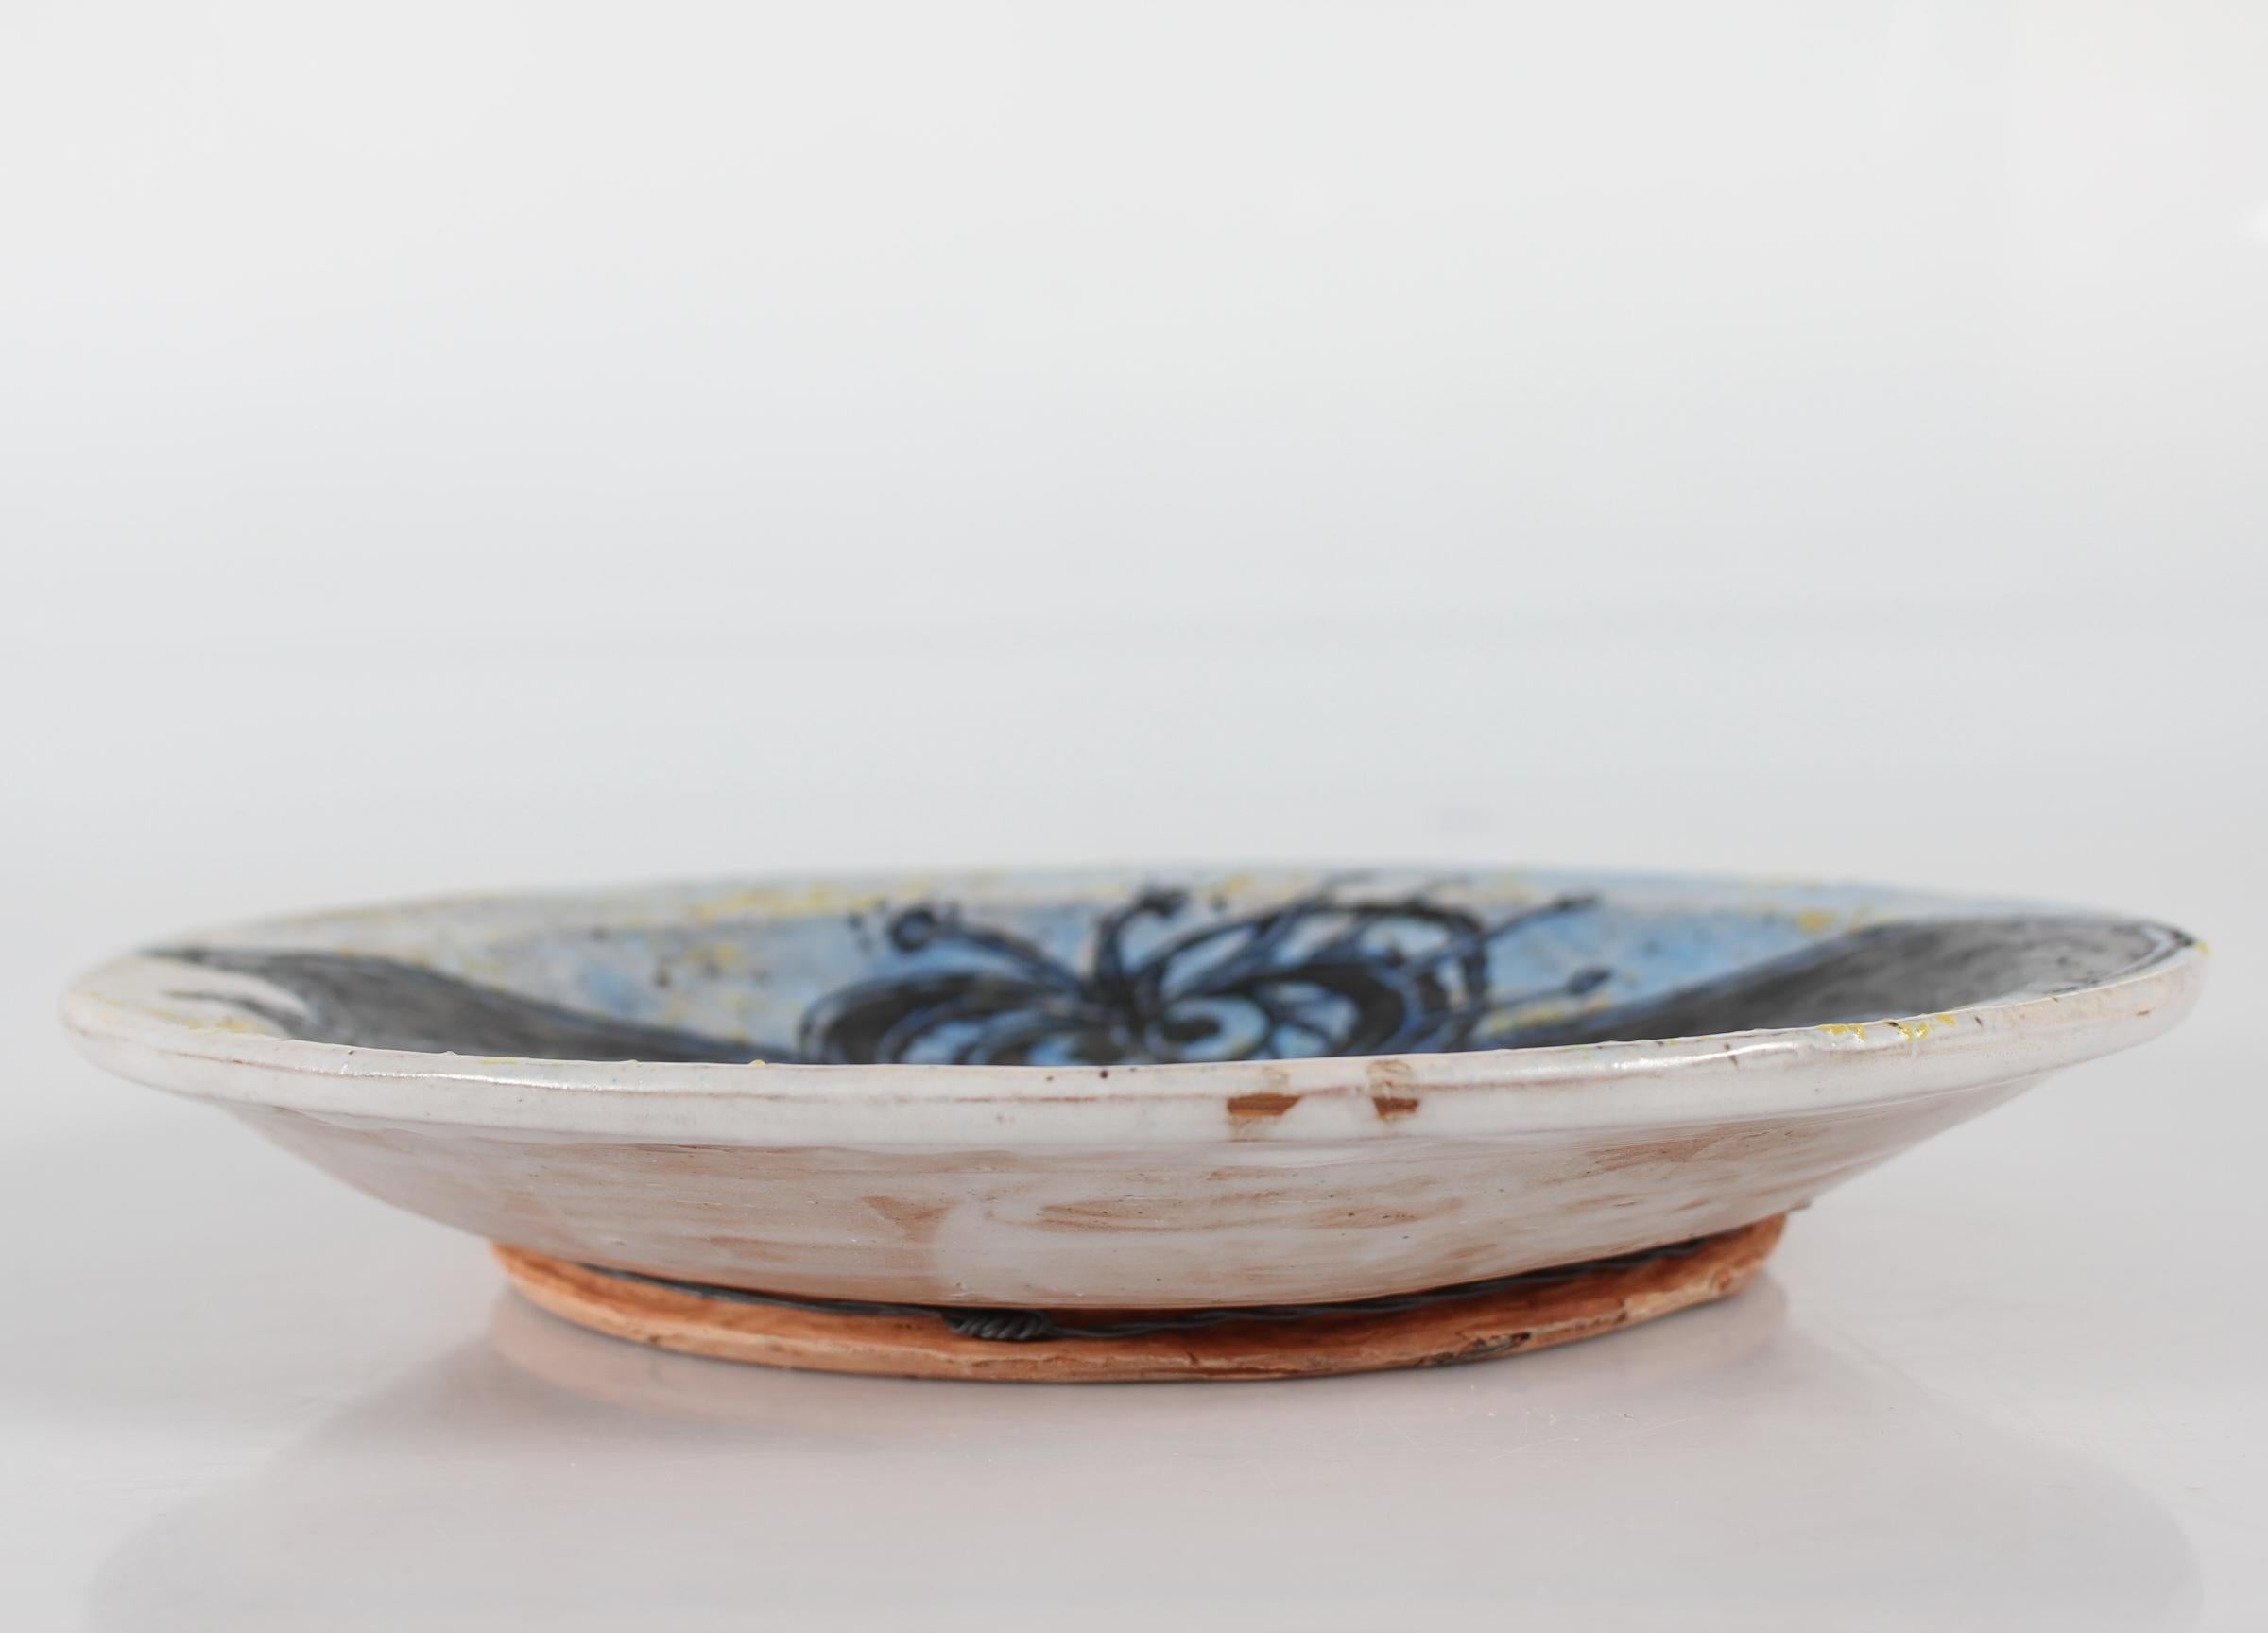 Danish mid-century low ceramic bowl by Leif Messell made at his own ceramic workshop in Sejs, Silkeborg, Denmark in 1997.

The low bowl has a figurative decoration of a flying bat on the inside. Glazed on the inside in black, dark blue, light blue